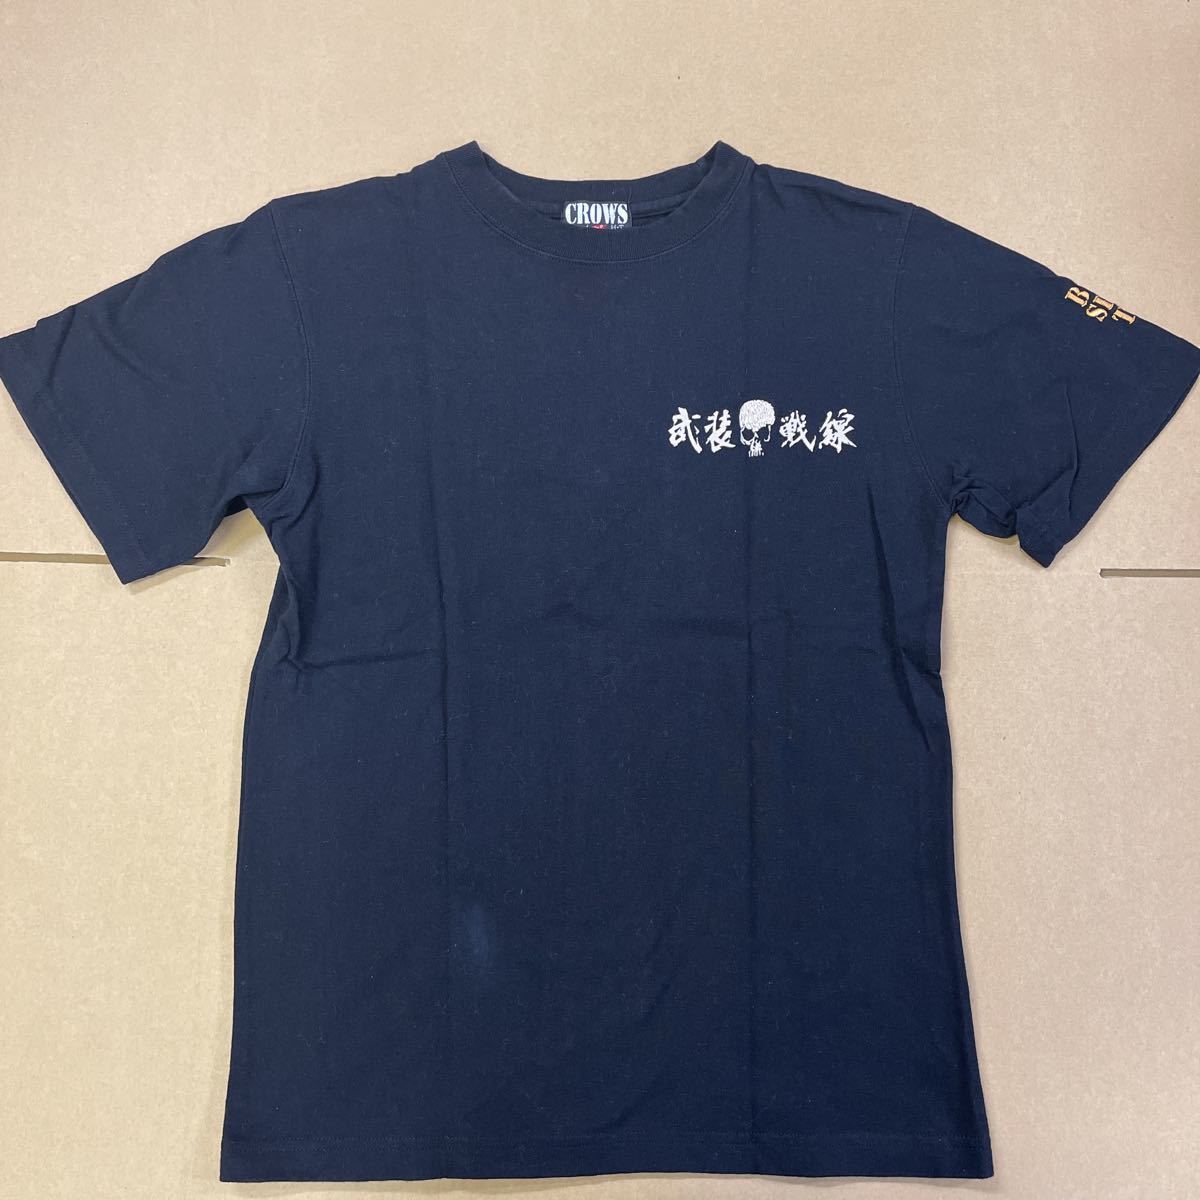 CROPPED HEADS 武装戦線 Tシャツ 黒 クローズ クロップドヘッズ ドクロ 刺繍 Front Of Armament CROWS ワースト 高橋ヒロシ Sサイズの画像1